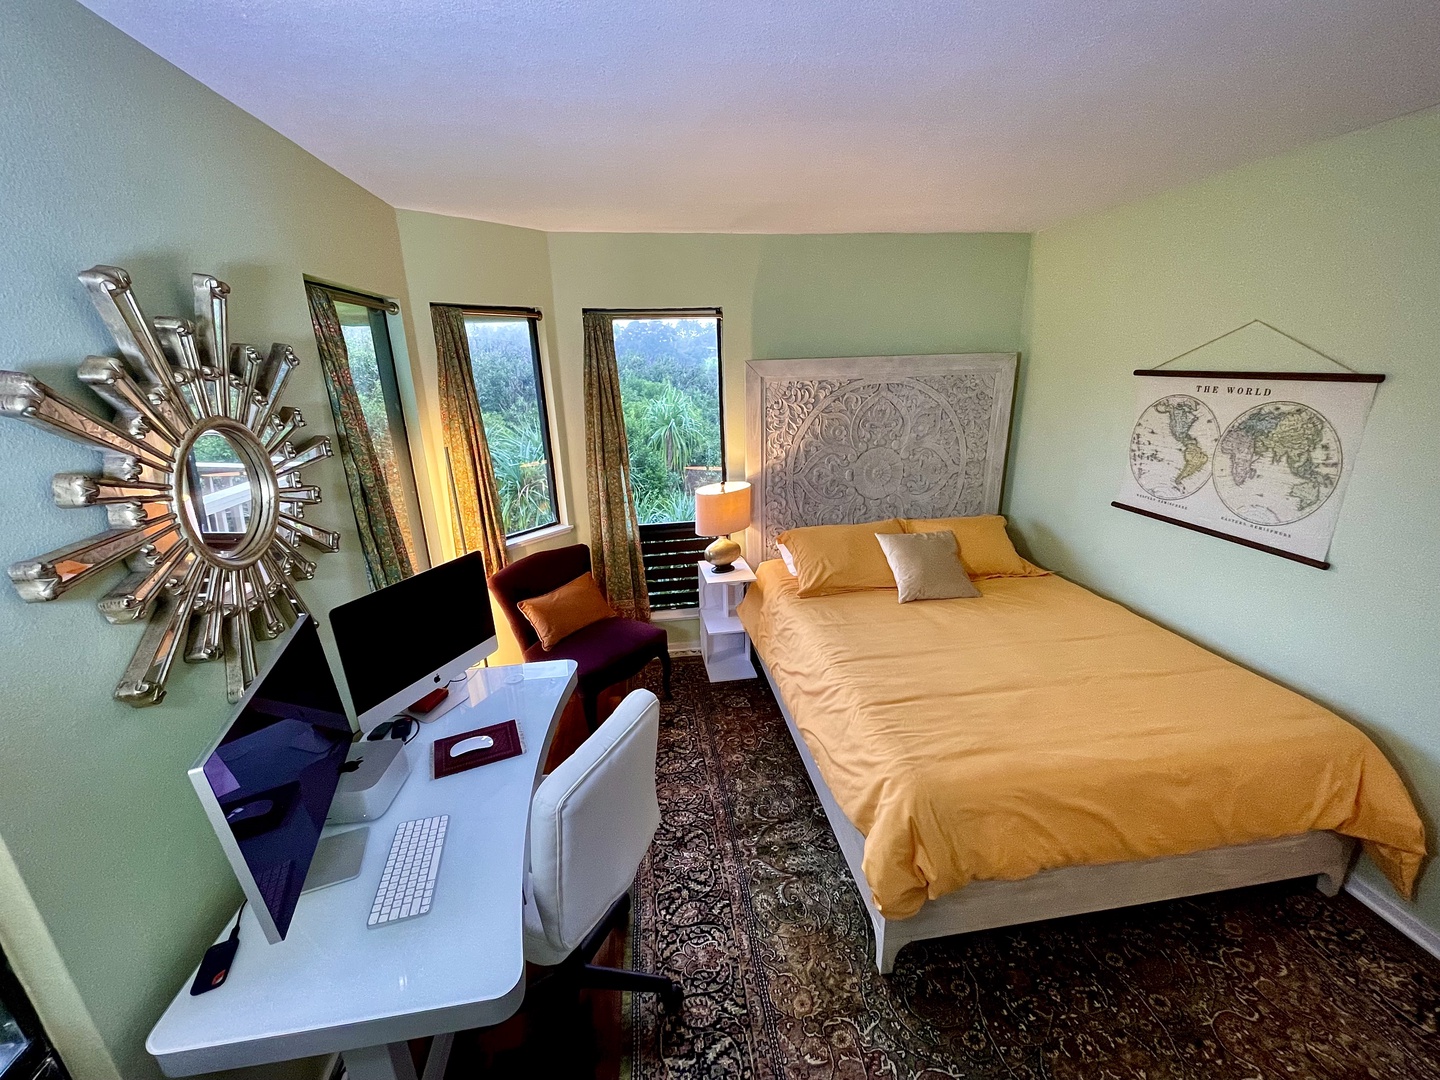 Princeville Vacation Rentals, Makanalani - Restful charm and productivity amidst natural surroundings in the guest bedroom.